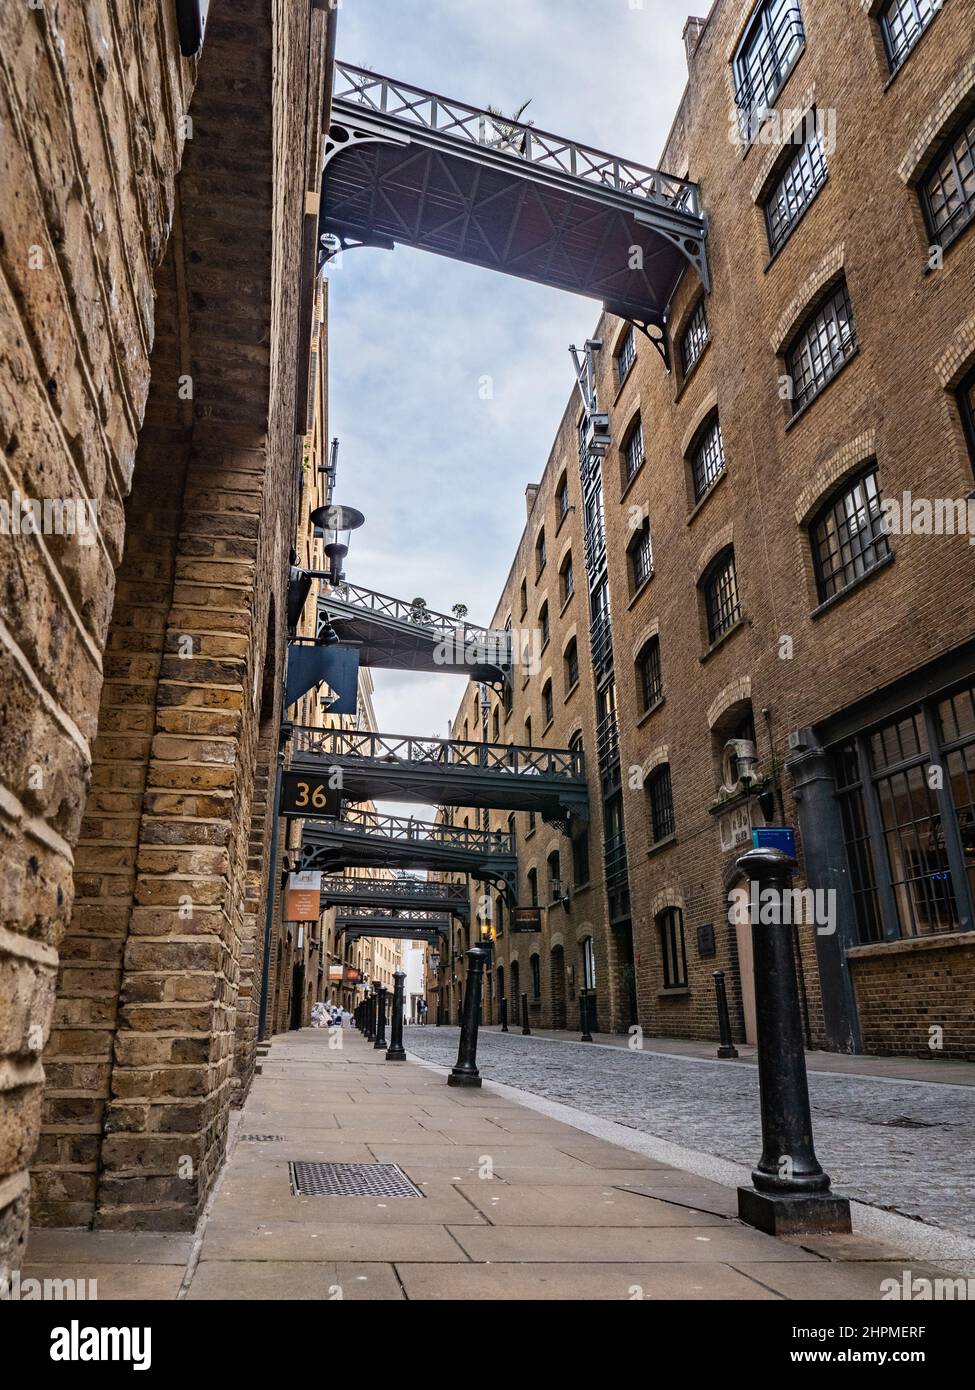 Shad Thames, London. Low, wide angle view of the Victorian architecture of the former industrial area now a gentrified shopping and business district. Stock Photo